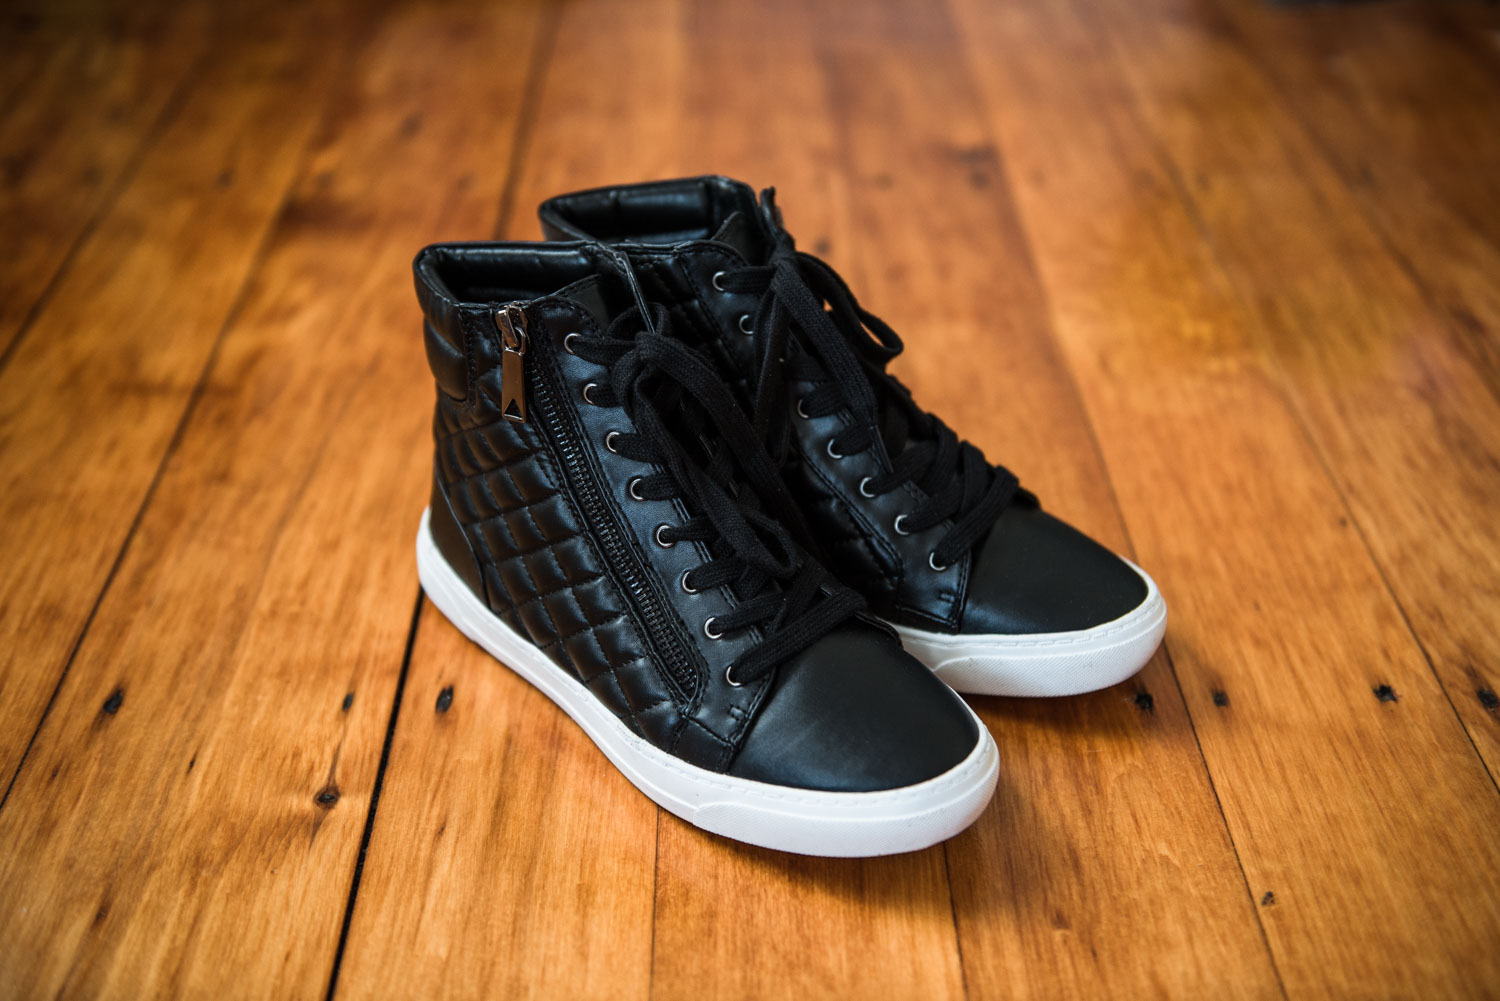 Personal Style | High-Top Black Sneakers | Lorna Stell | Photographer | Boston MA